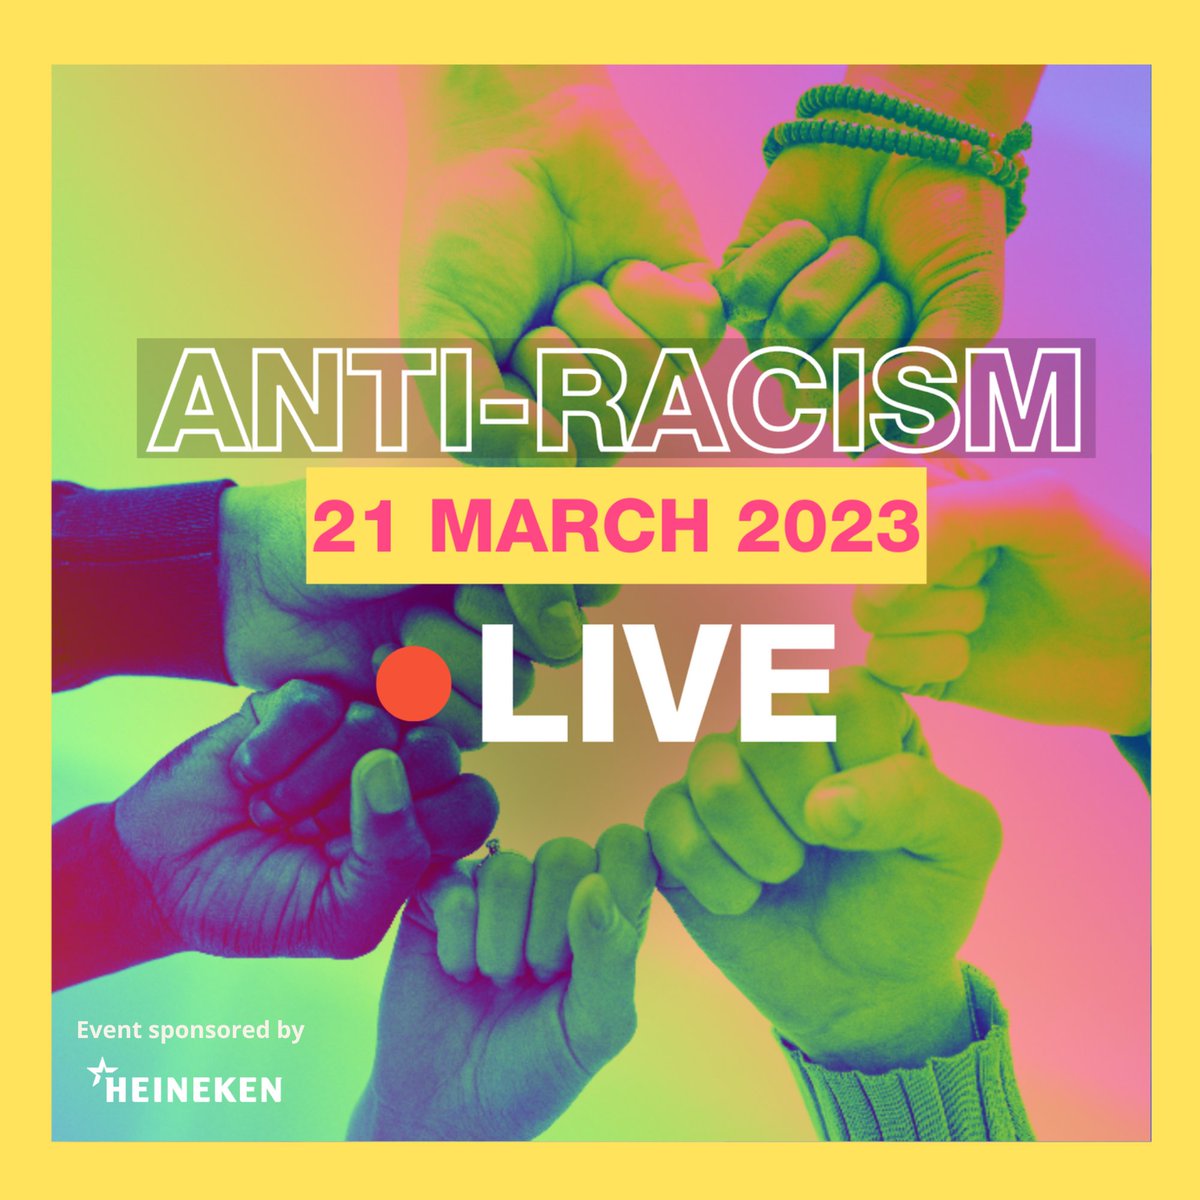 It’s time! Tune in right now to watch Anti-Racism Live on peaceoneday.org or on Twitter @PeaceOneDay. We cannot wait for you to see what we have in store!